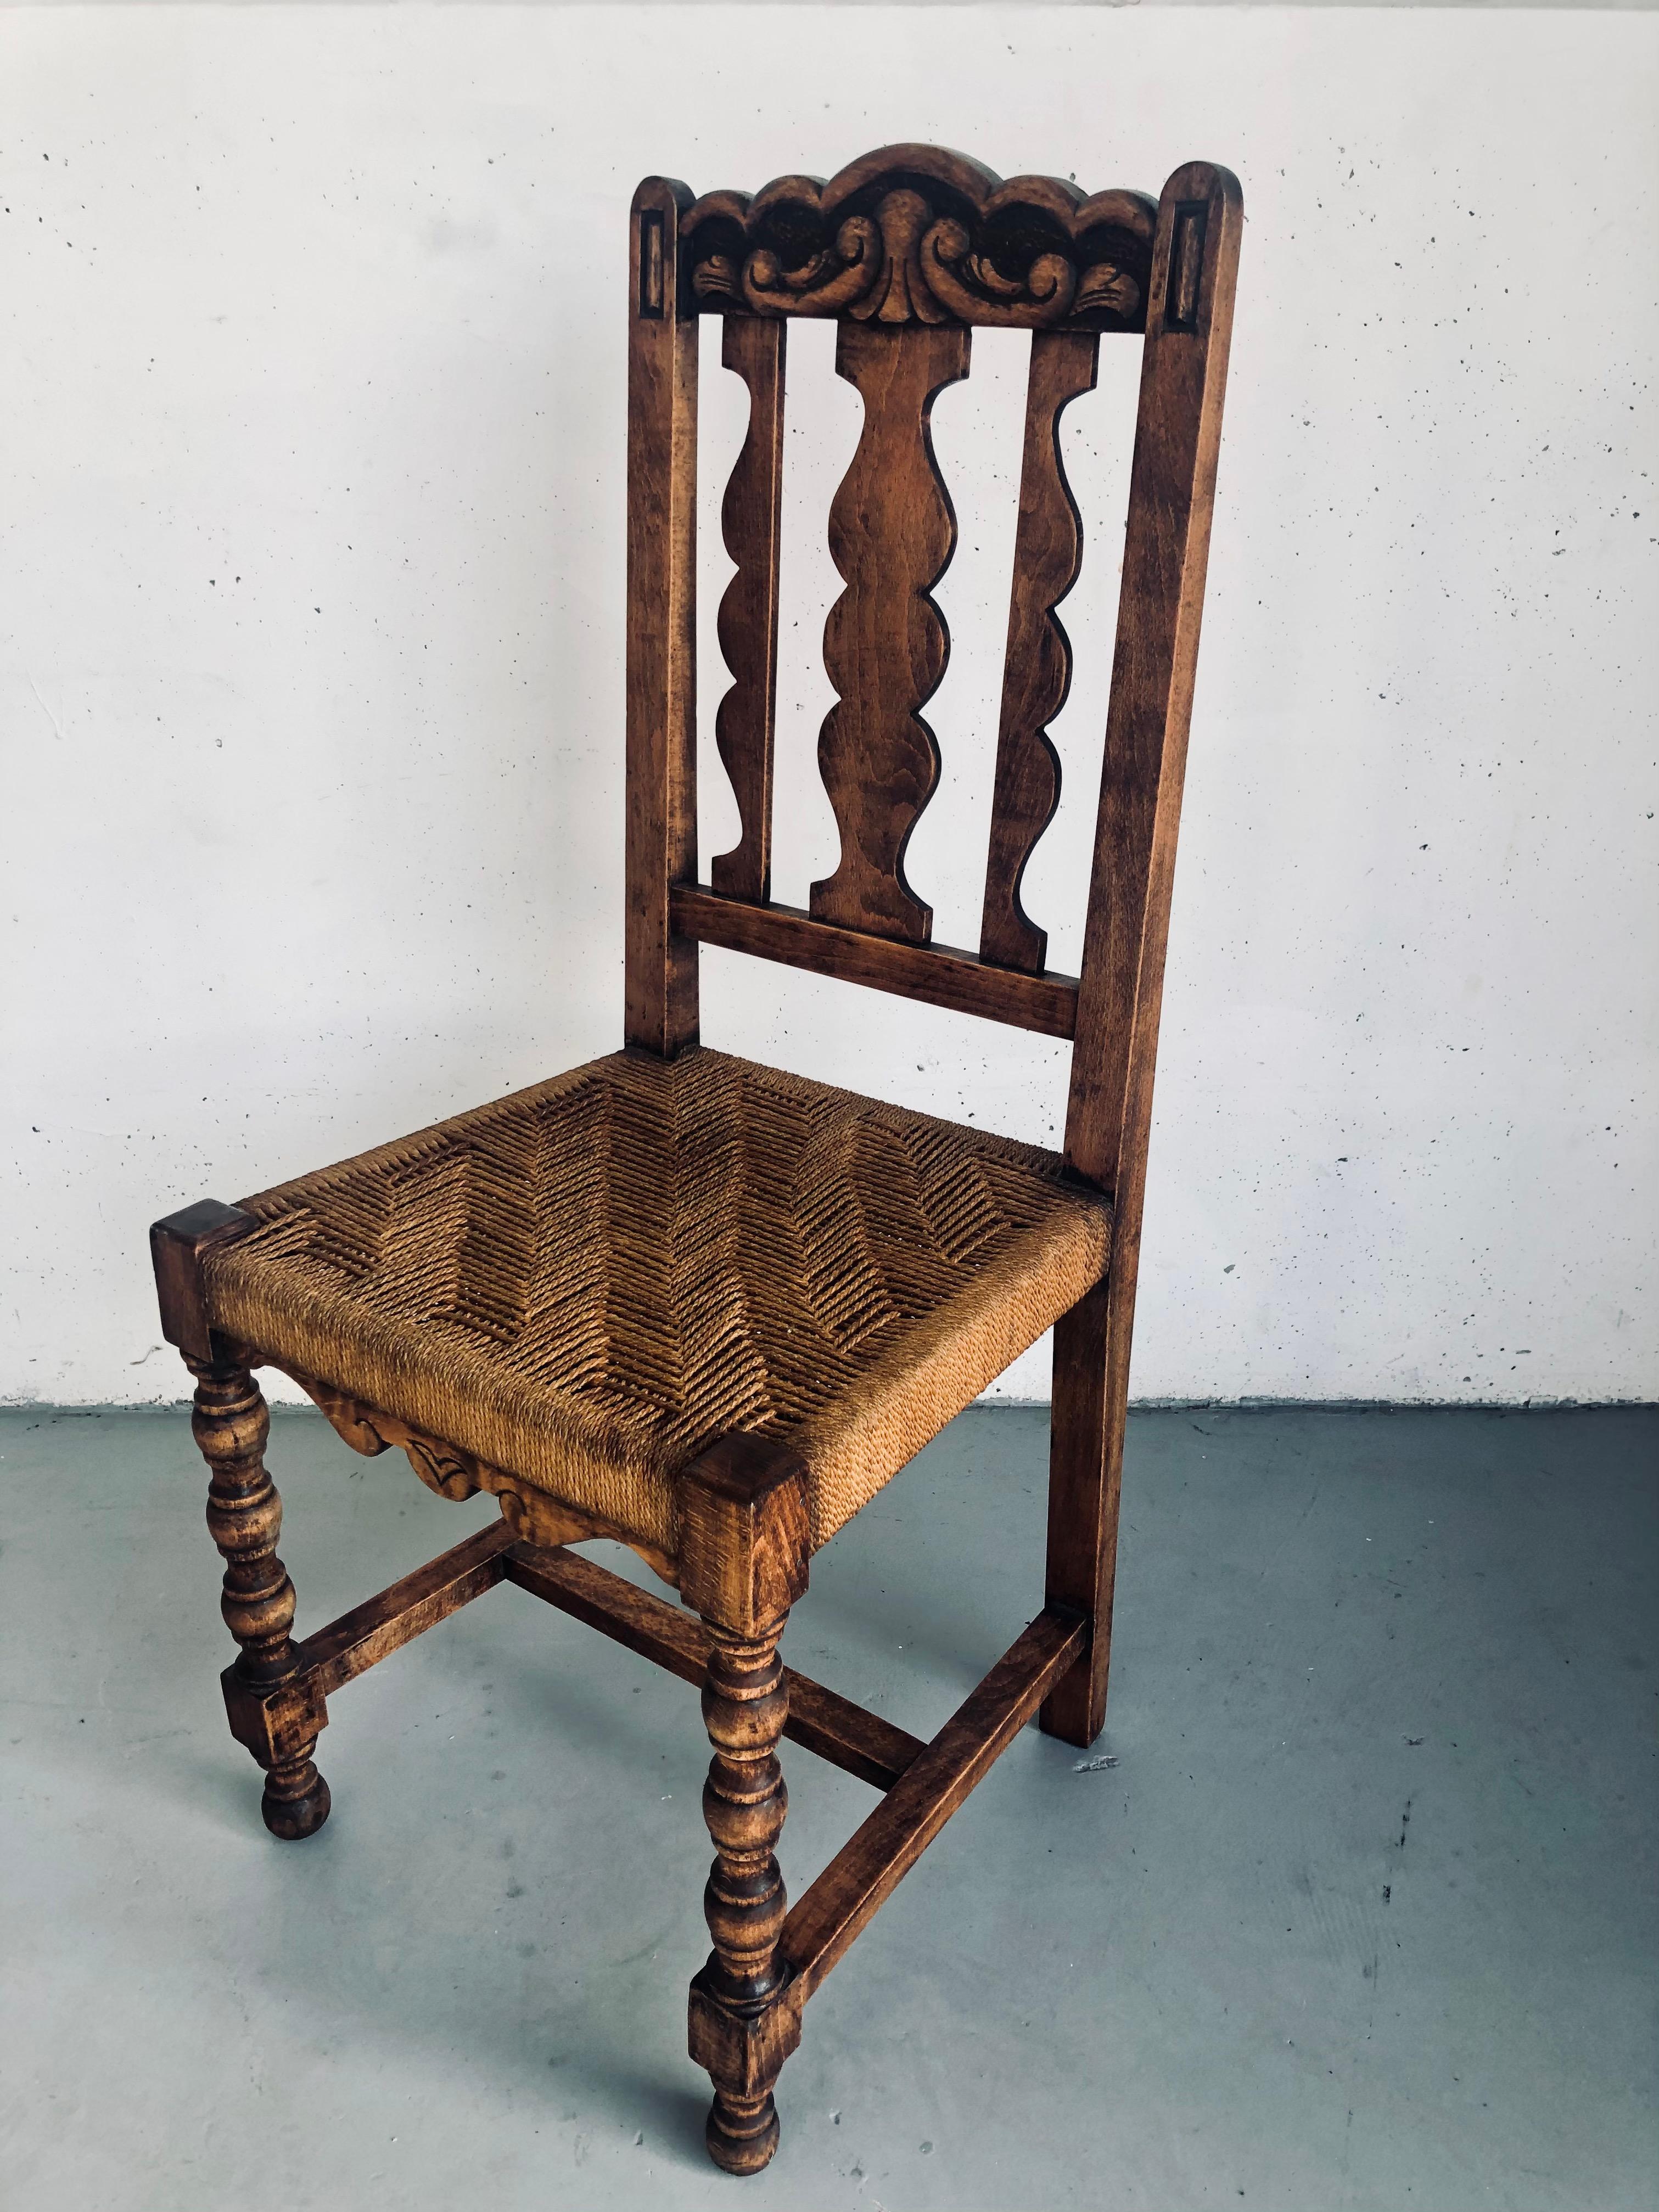 Vintage solid wood, turned legs and intricate woven rope seat chair, Rare Spanish wooden castilian style chair, Pristine Condition, I must say that it is even more beautiful in person, it is a really stunning, unique, rare piece of furniture